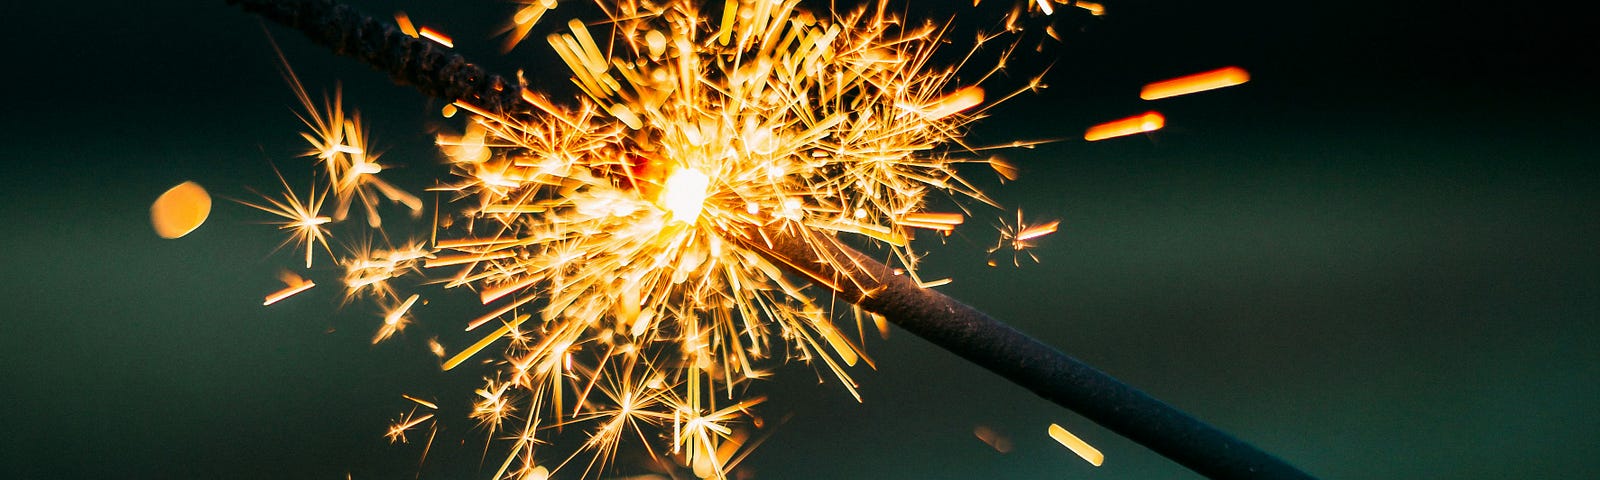 Two lit sparklers touch each other